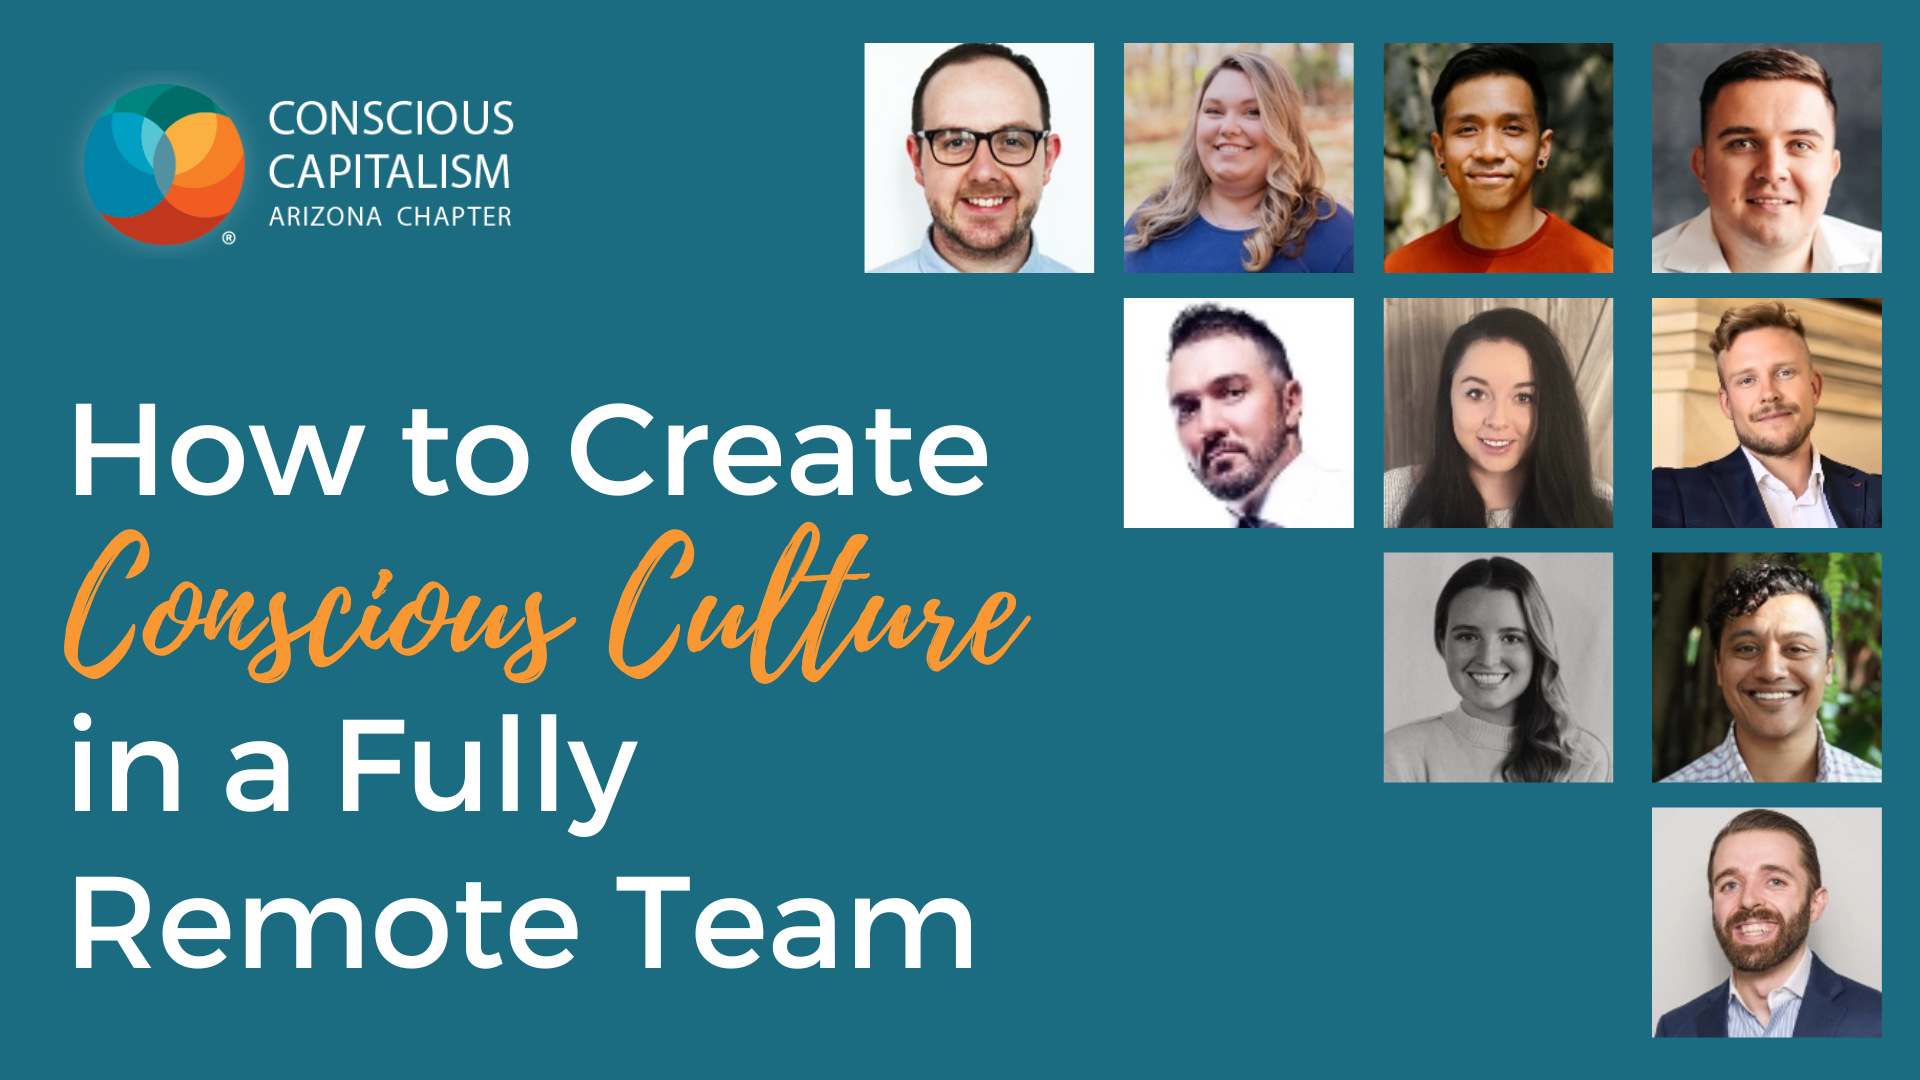 How to Create a Conscious Culture in a Fully Remote Team